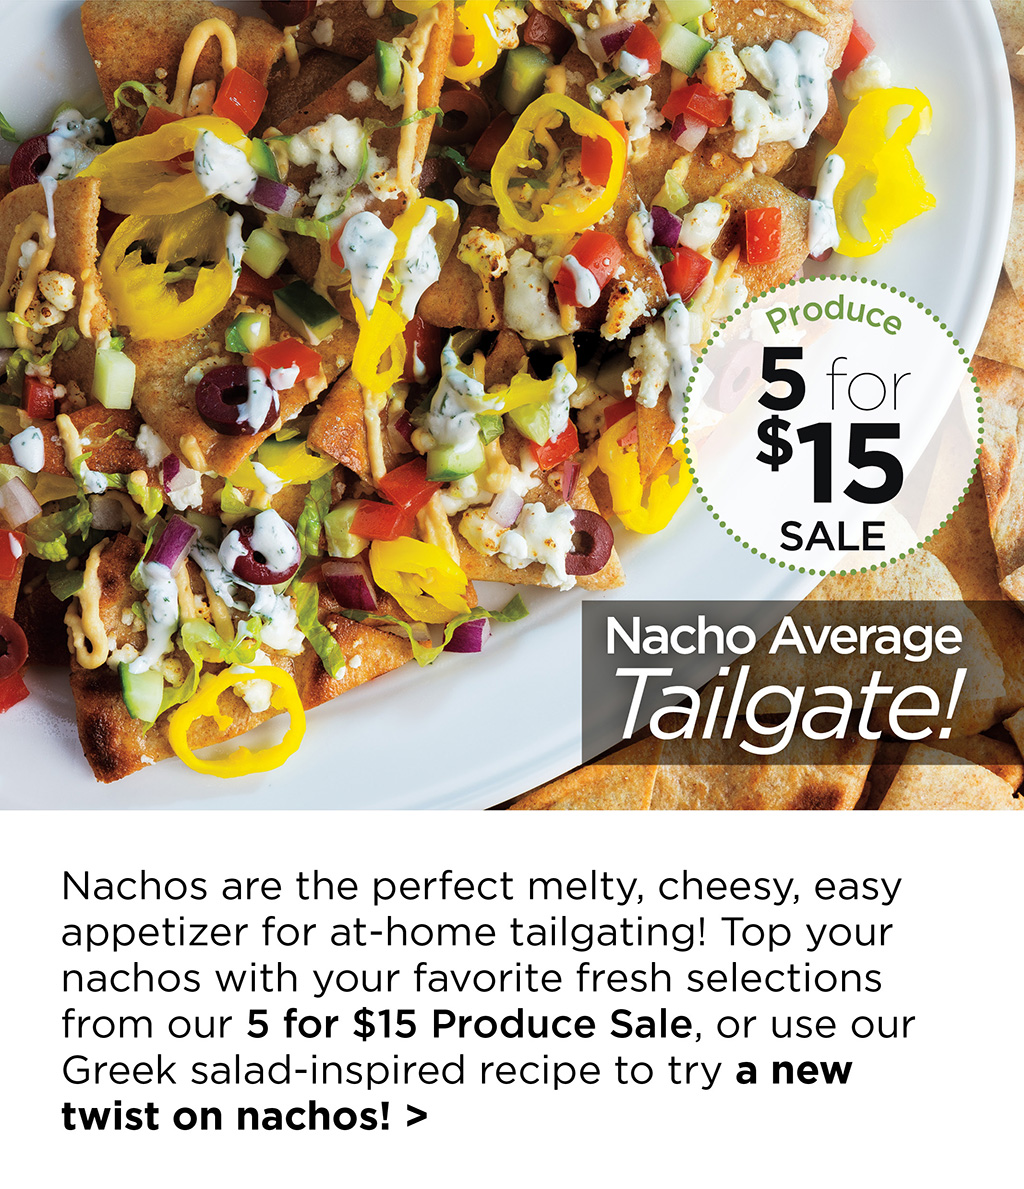 Nacho Average Tailgate! - Nachos are the perfect melty, cheesy, easy appetizer for at-home tailgating! Top your nachos with your favorite fresh selections from our 5 for $15 Produce Sale, or use our Greek salad-inspired recipe to try a new twist on nachos! >